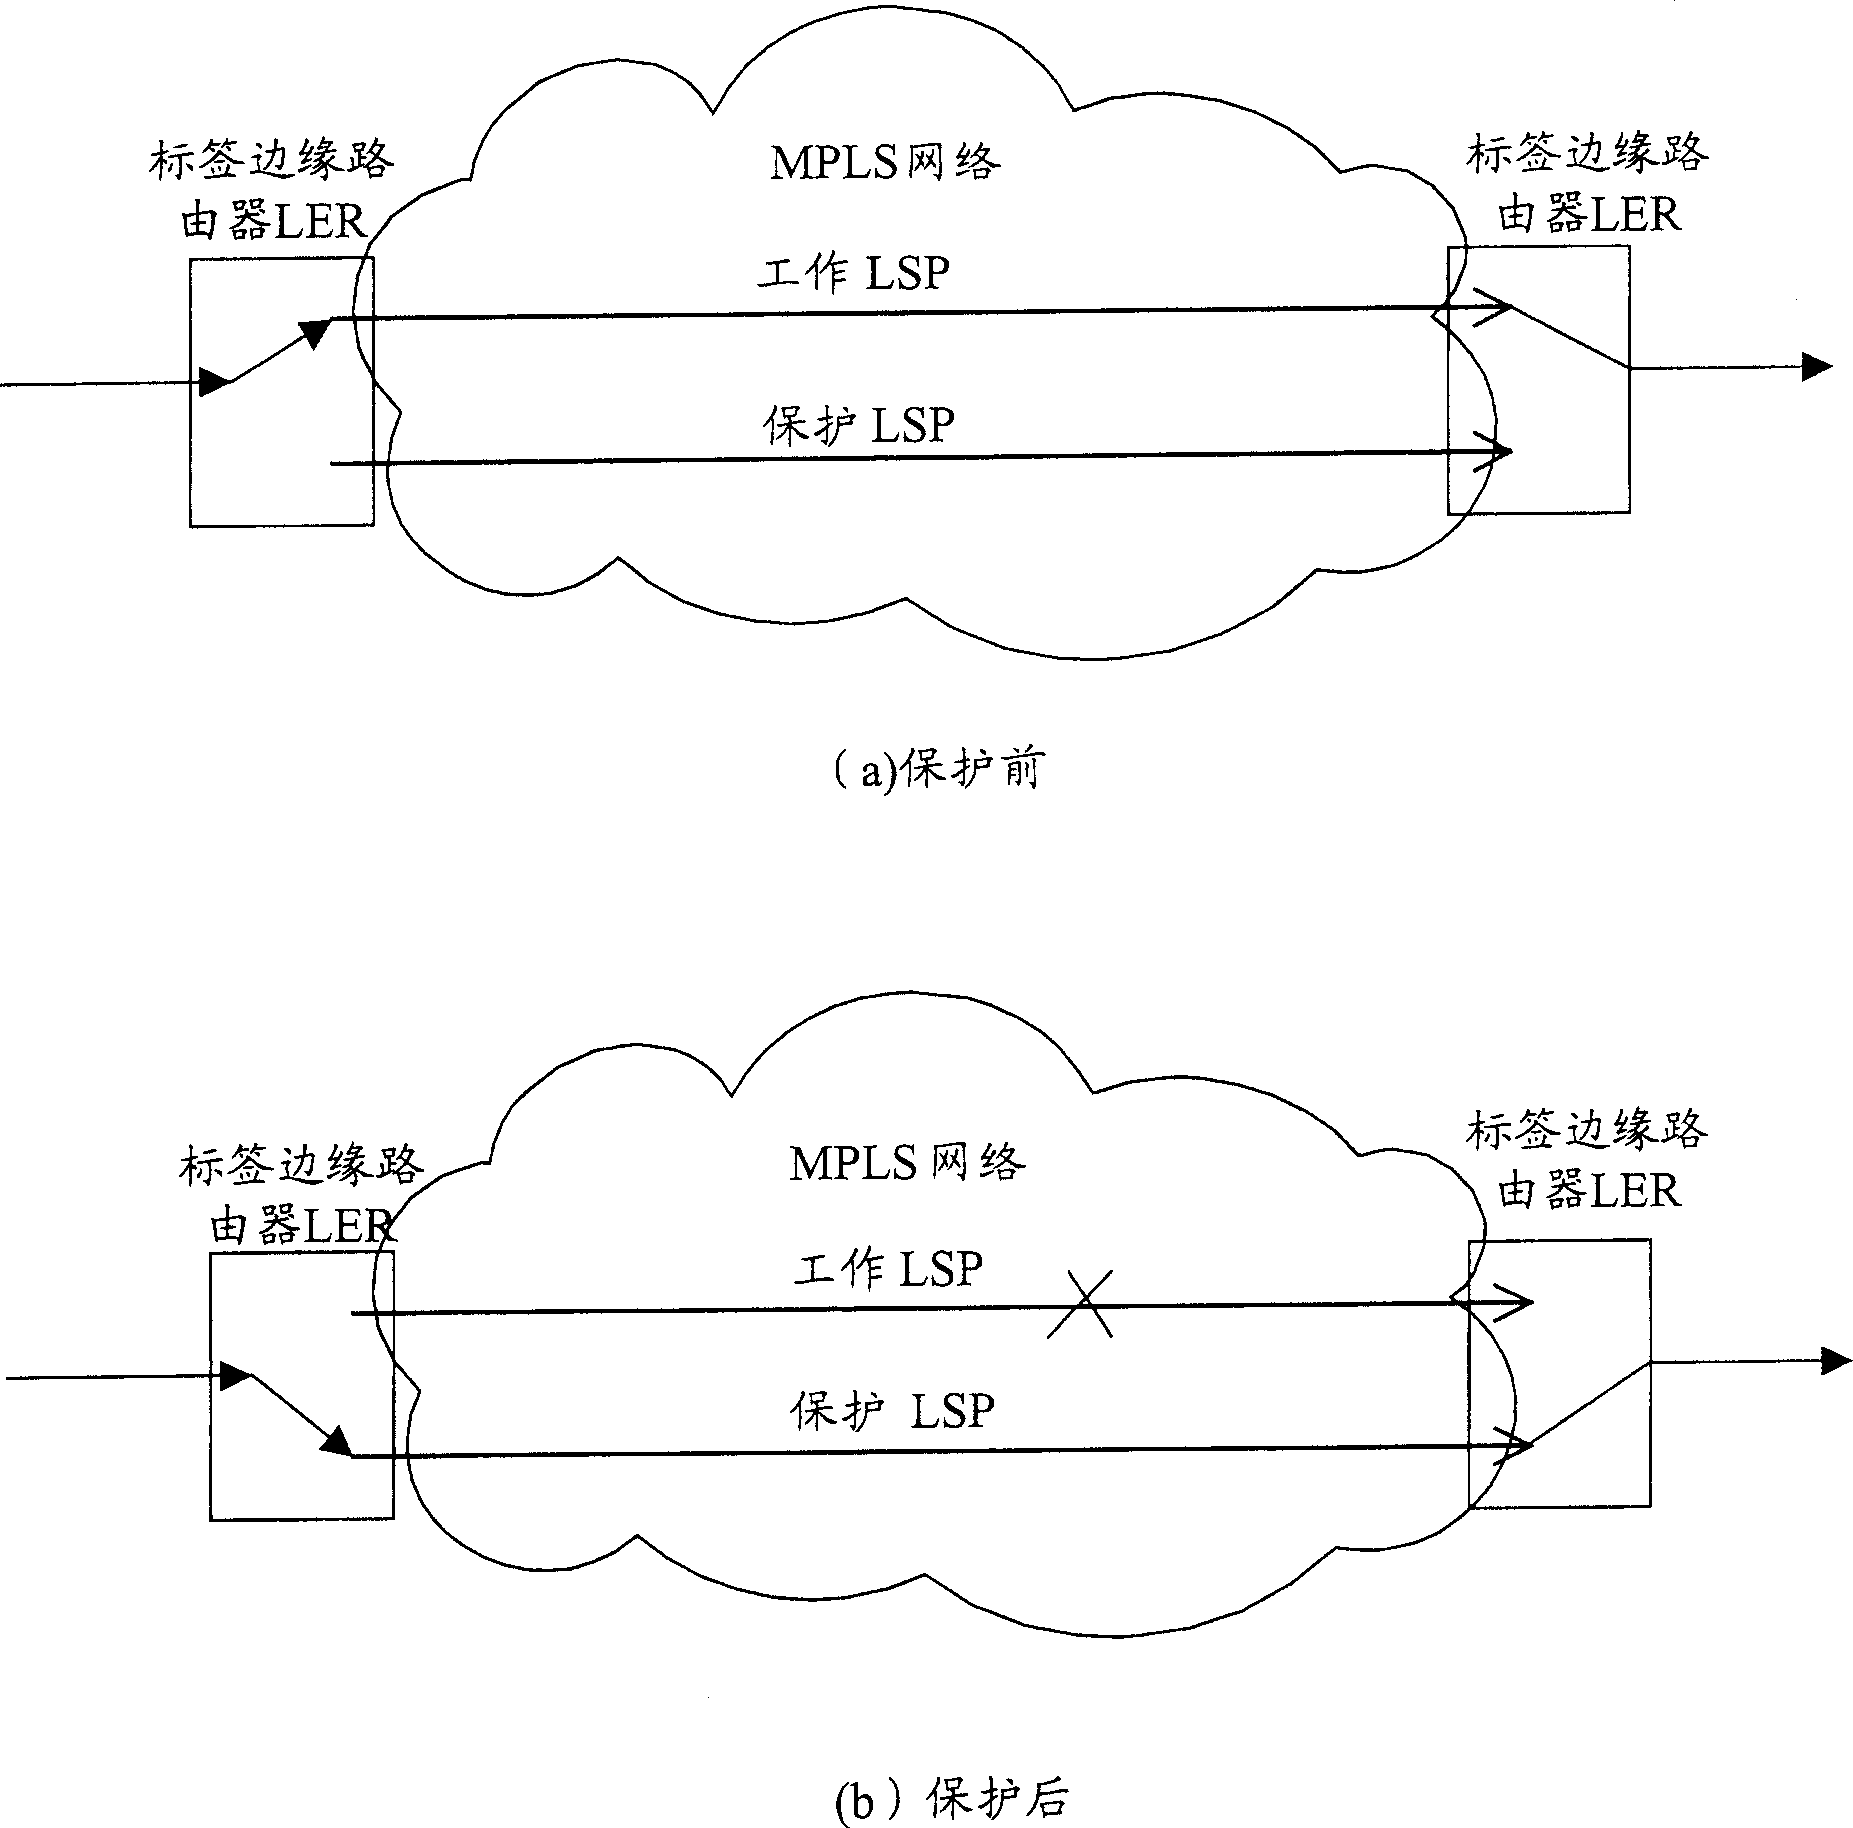 Protection switching method in multiprotocol label switching system